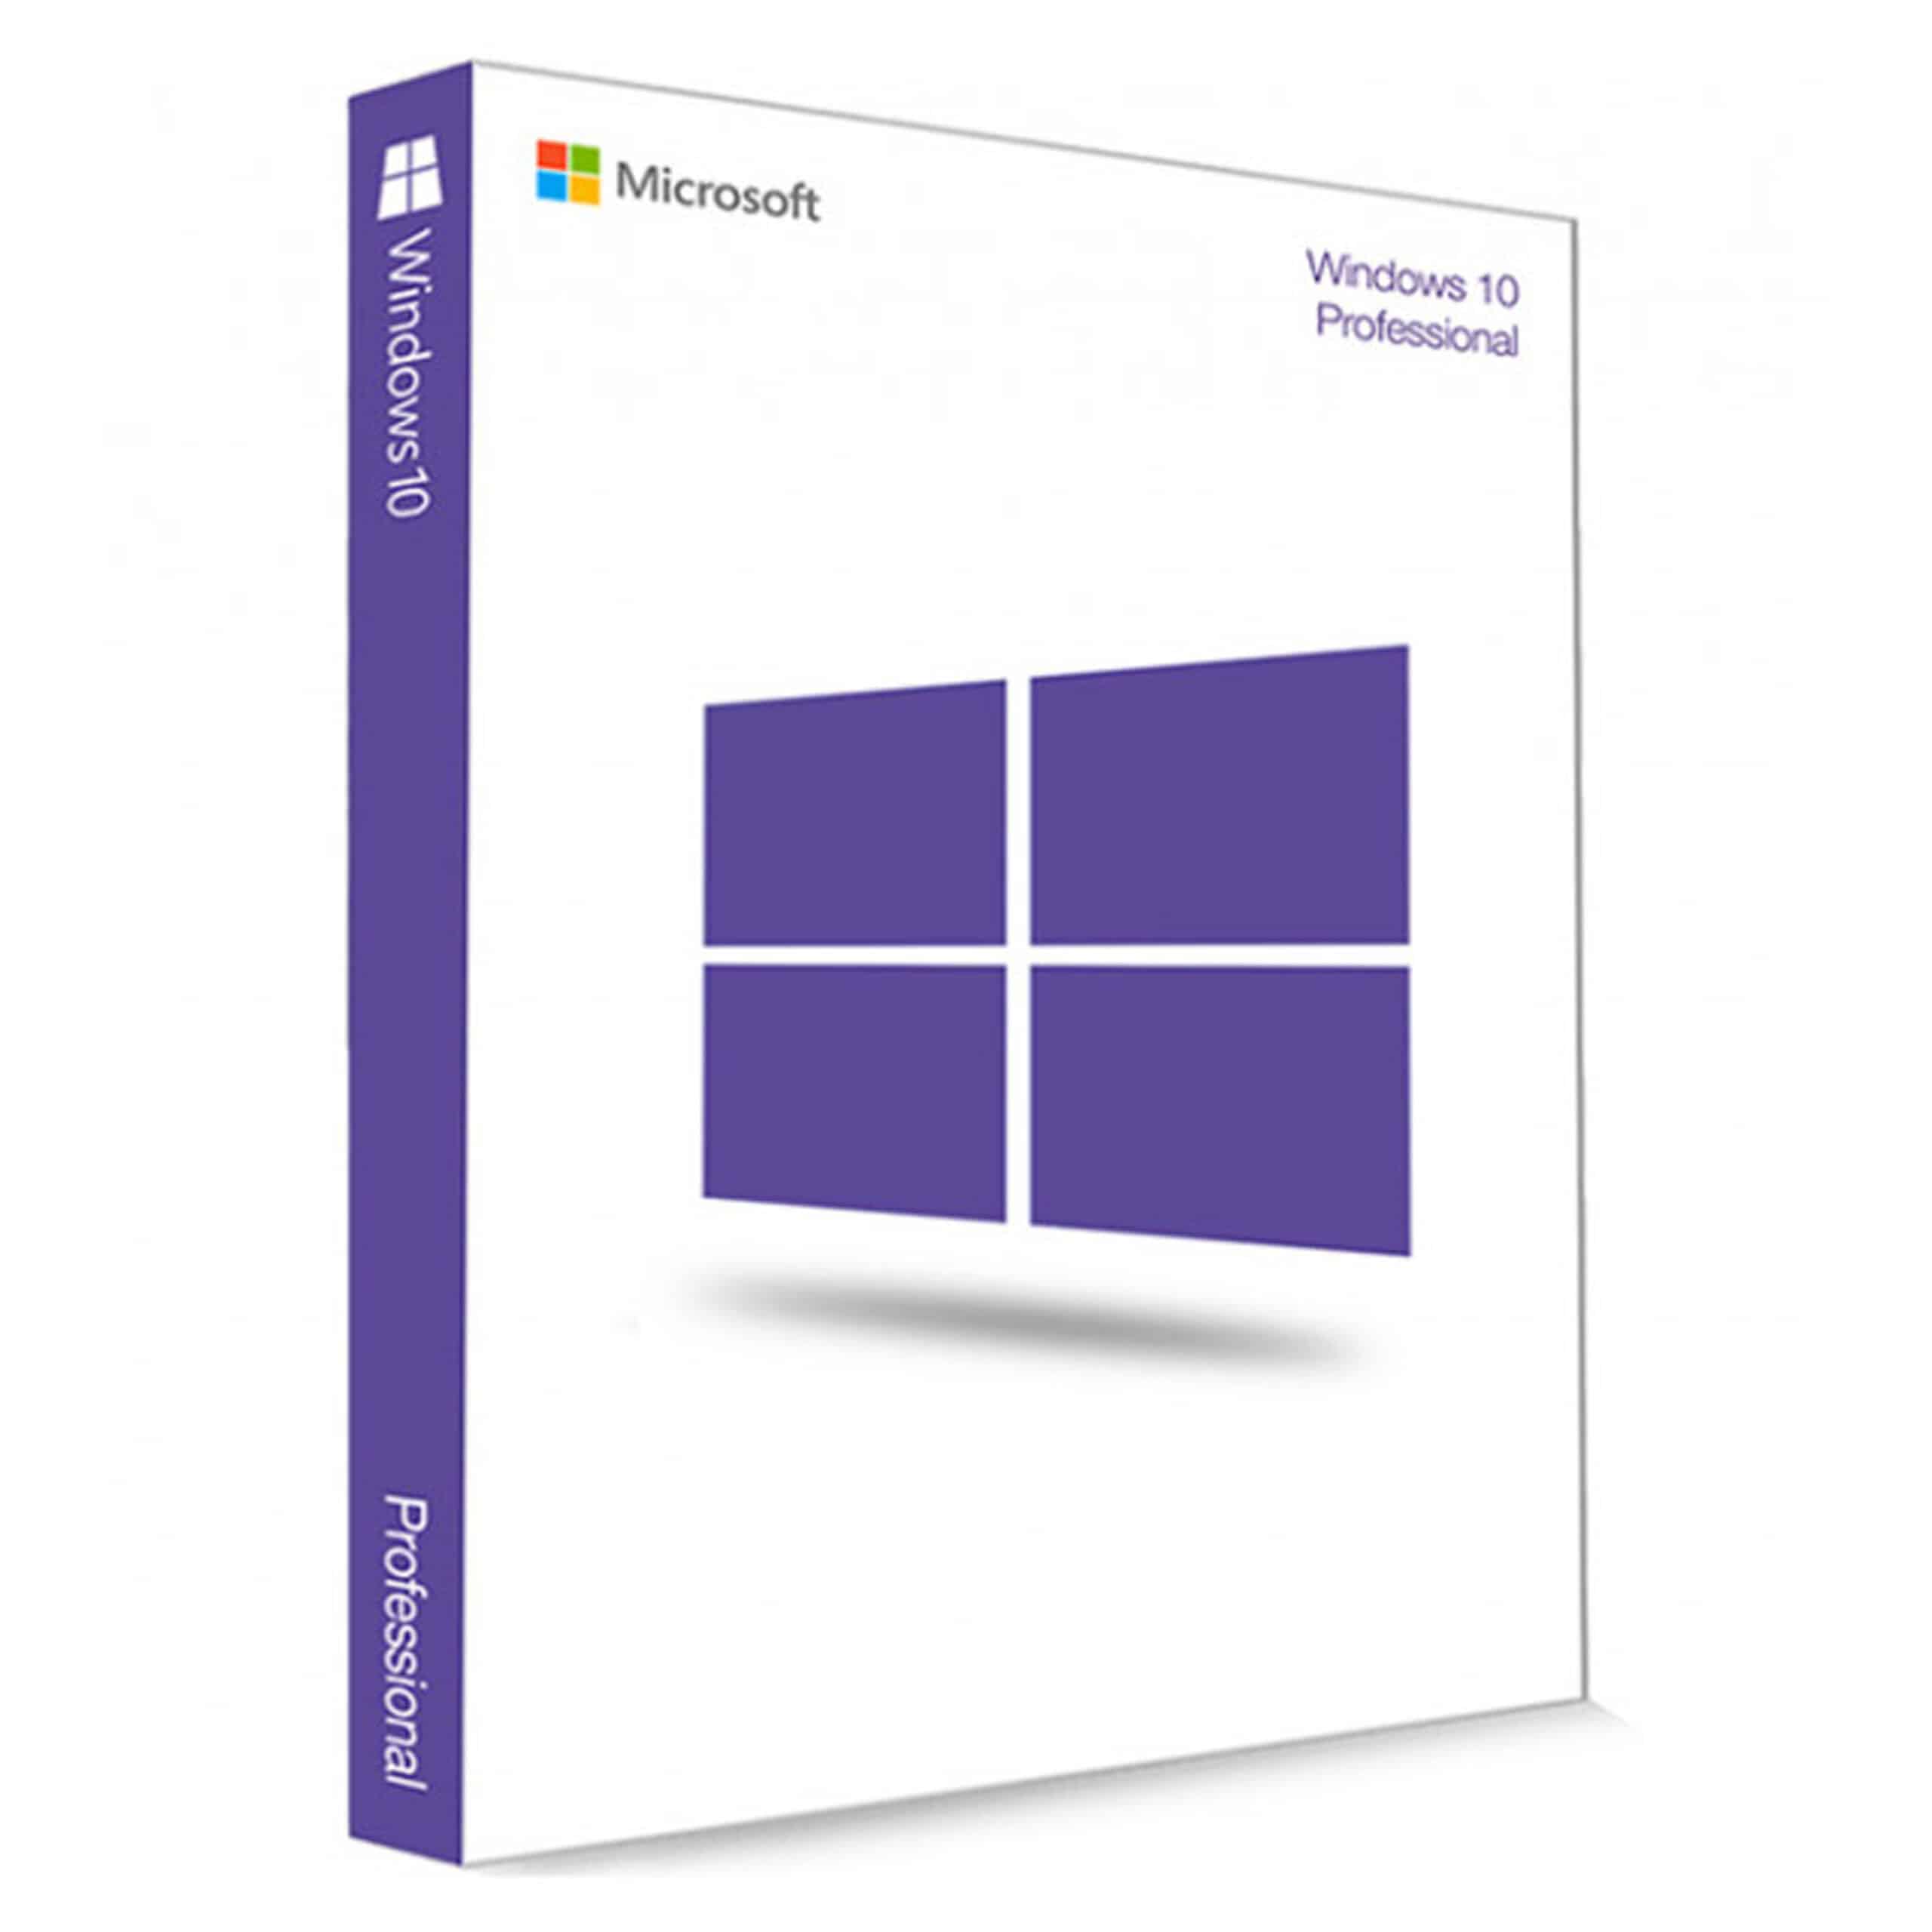 Windows 10 Pro Professional - LICENSE FOR ALL